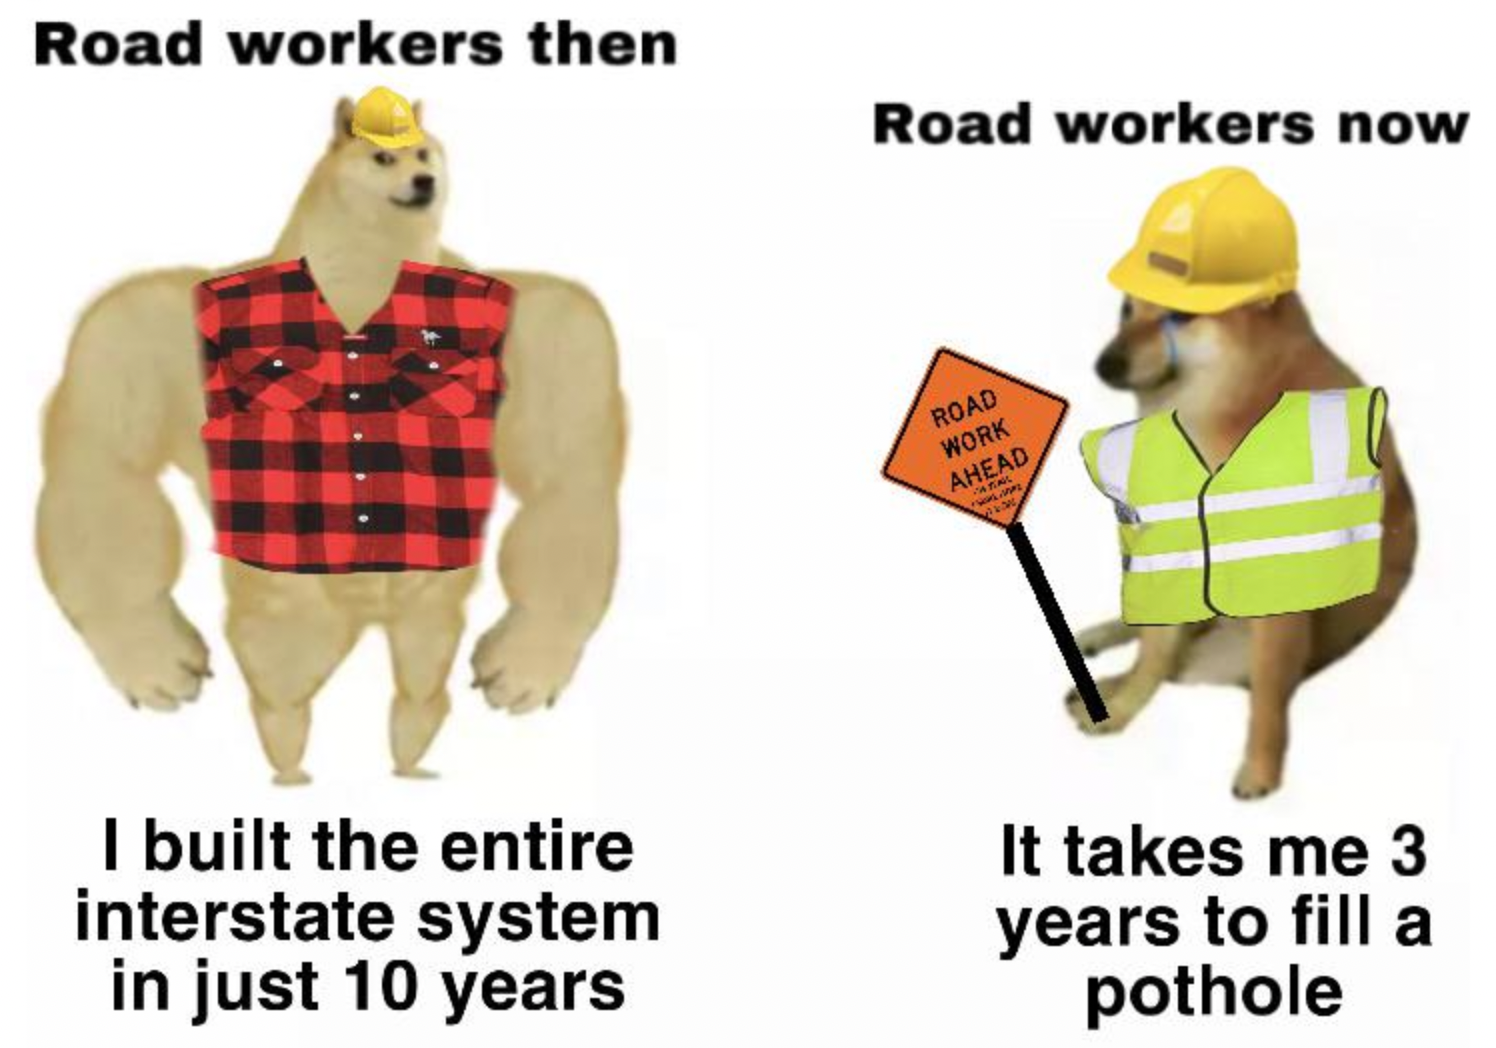 design - Road workers then I built the entire interstate system in just 10 years Road workers now Road Work Ahead Hea It takes me 3 years to fill a pothole